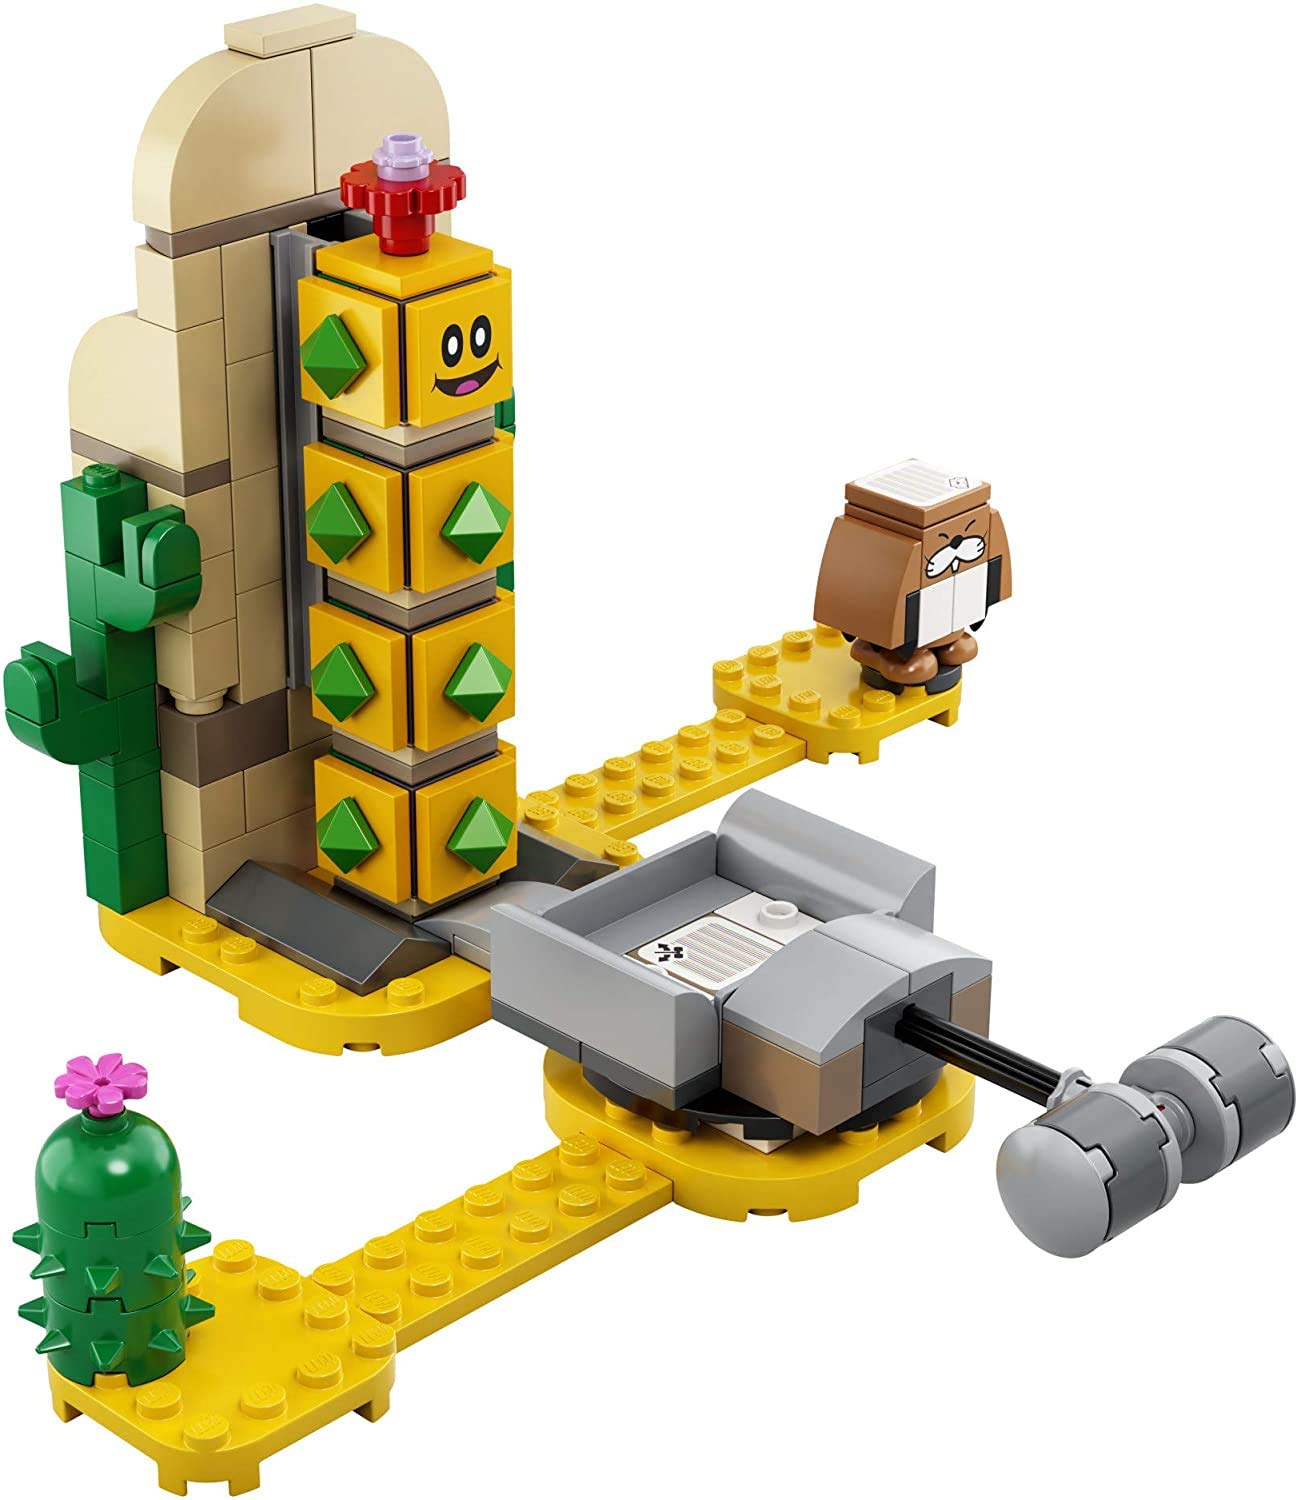 LEGO Super Mario Desert Pokey Expansion Set 71363 Building Kit; Toy for Creative Kids to Combine with The Super Mario Adventures with Mario Starter Course (71360) Playset (180 Pieces)